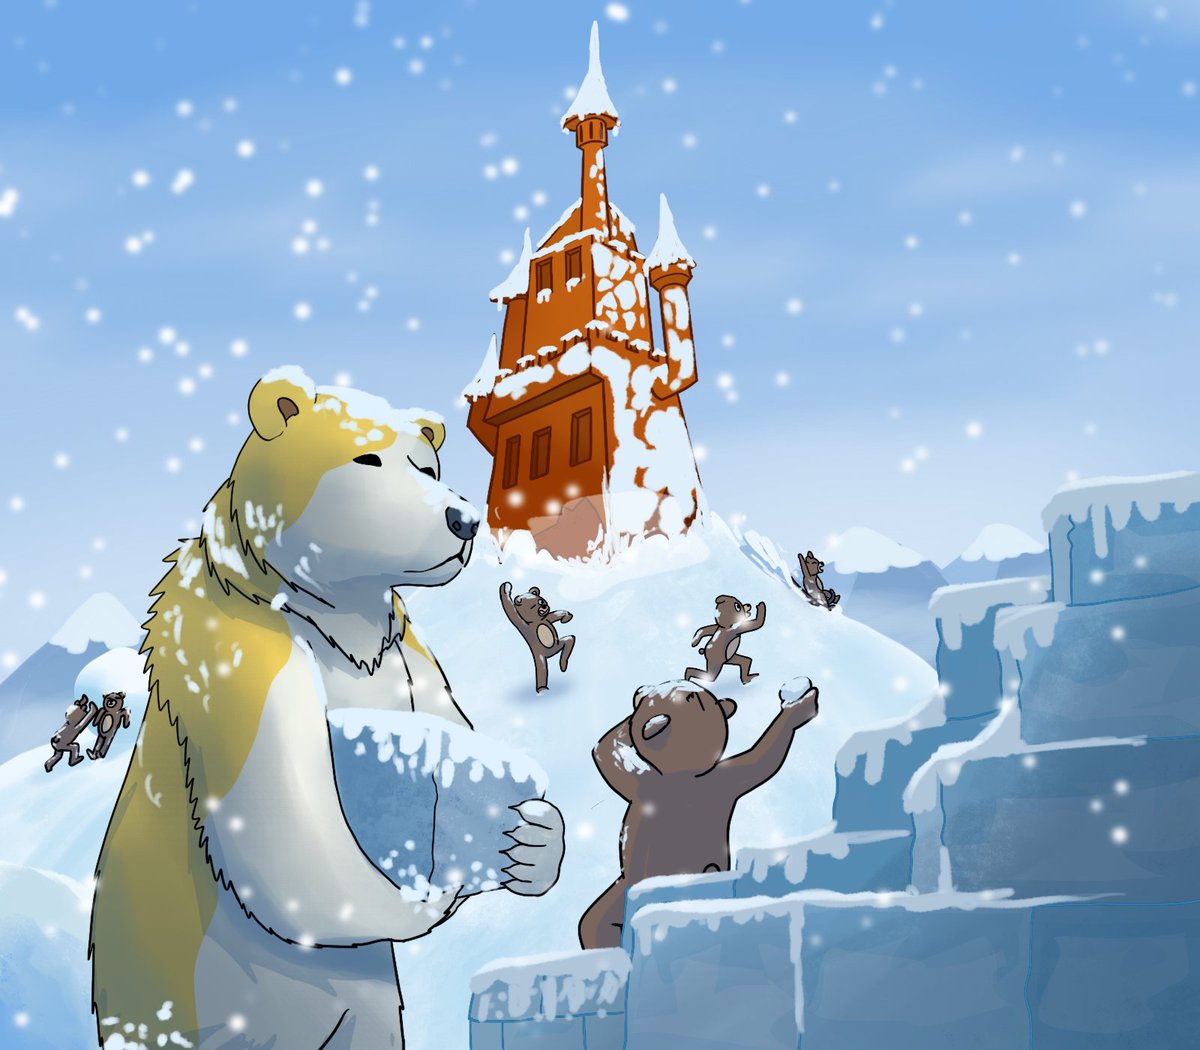 Step into a winter wonderland within Kingdomly! Witness Arkto's Snowy Hideaway is taking shape as he crafts a cozy shelter amidst the snowy landscape. Keep cool and embrace the chill until May 10!